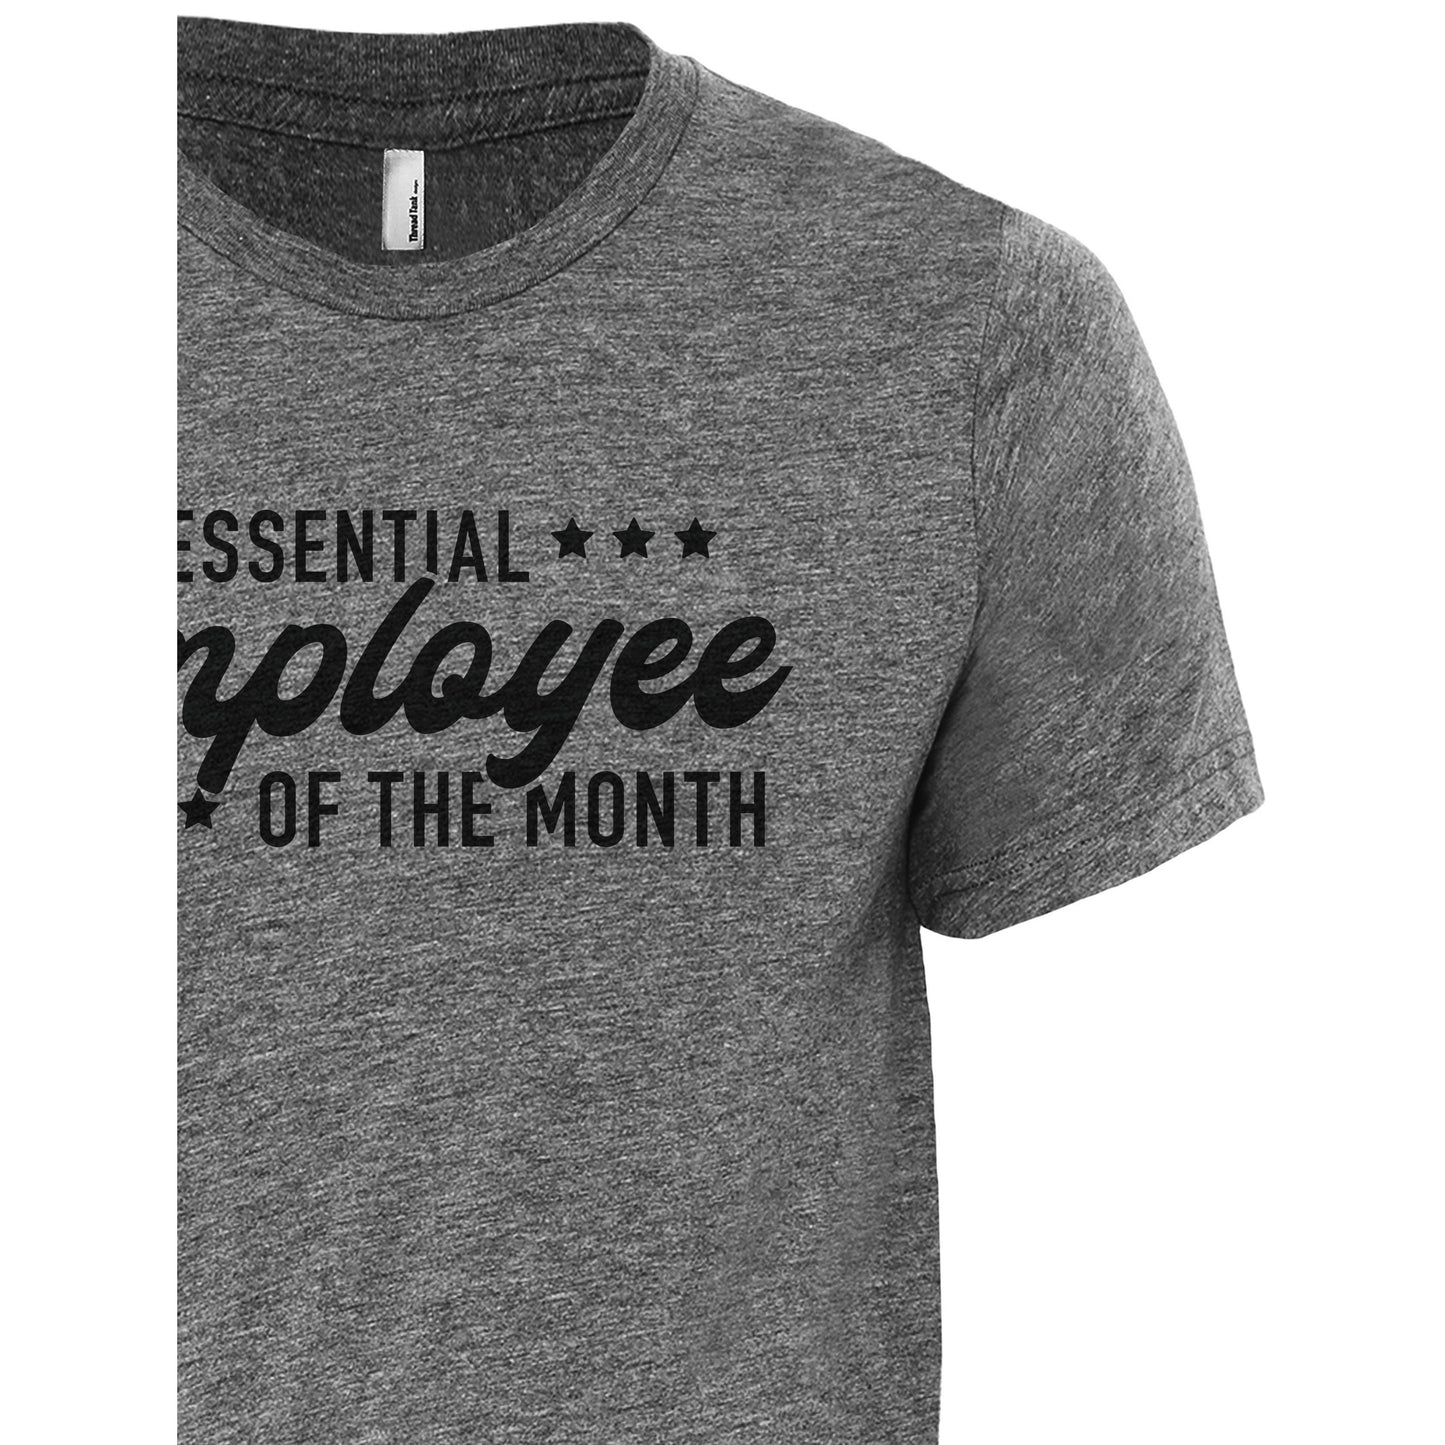 Non-Essential Employee Of The Month - Stories You Can Wear by Thread Tank